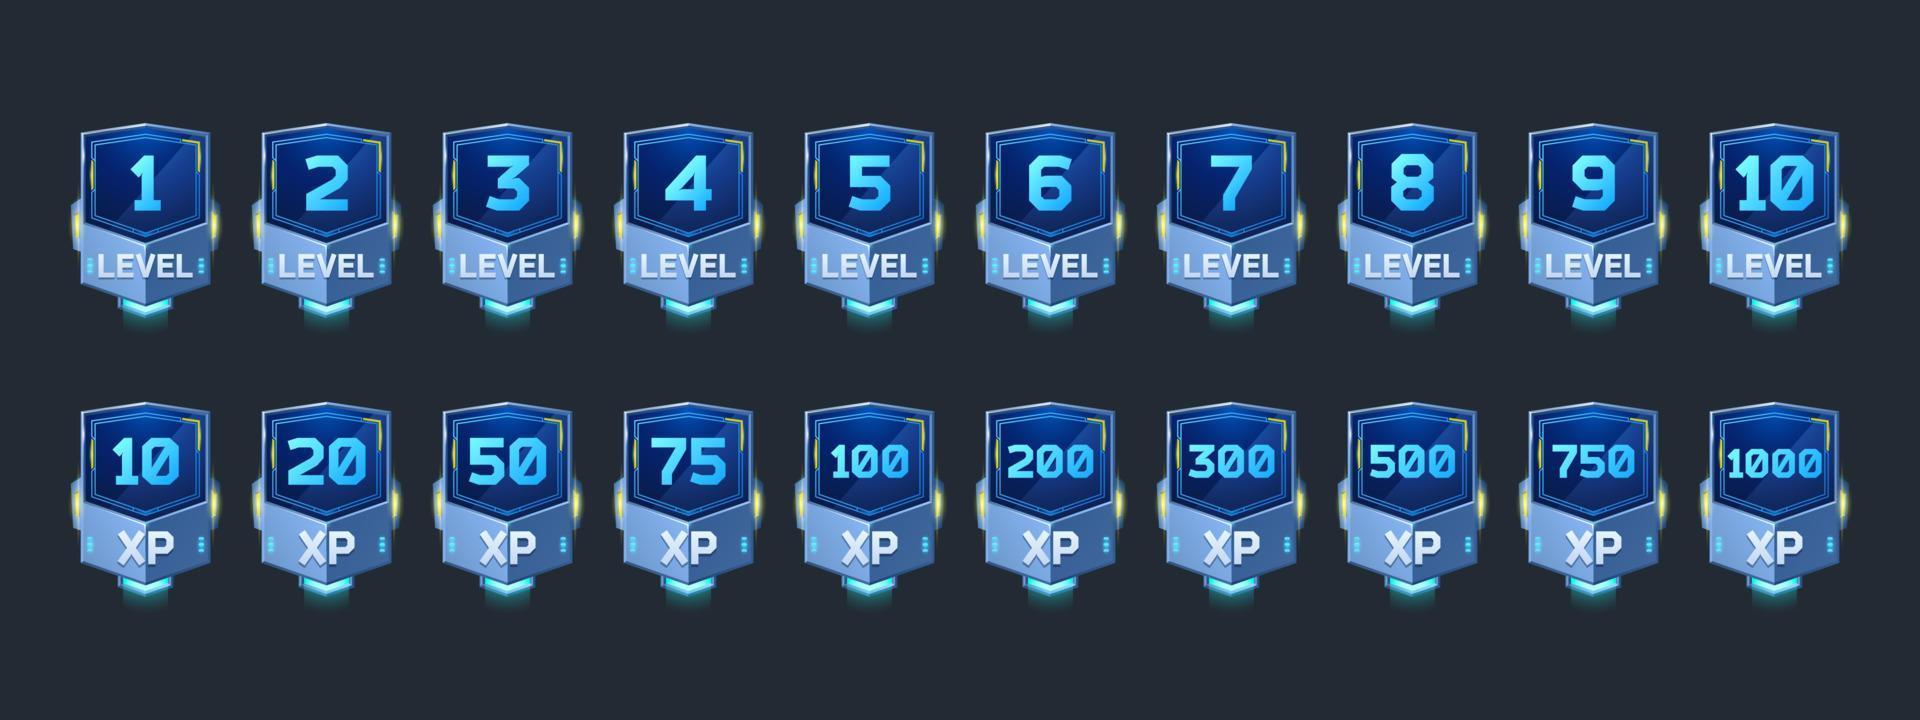 Badges with level number and xp for game vector